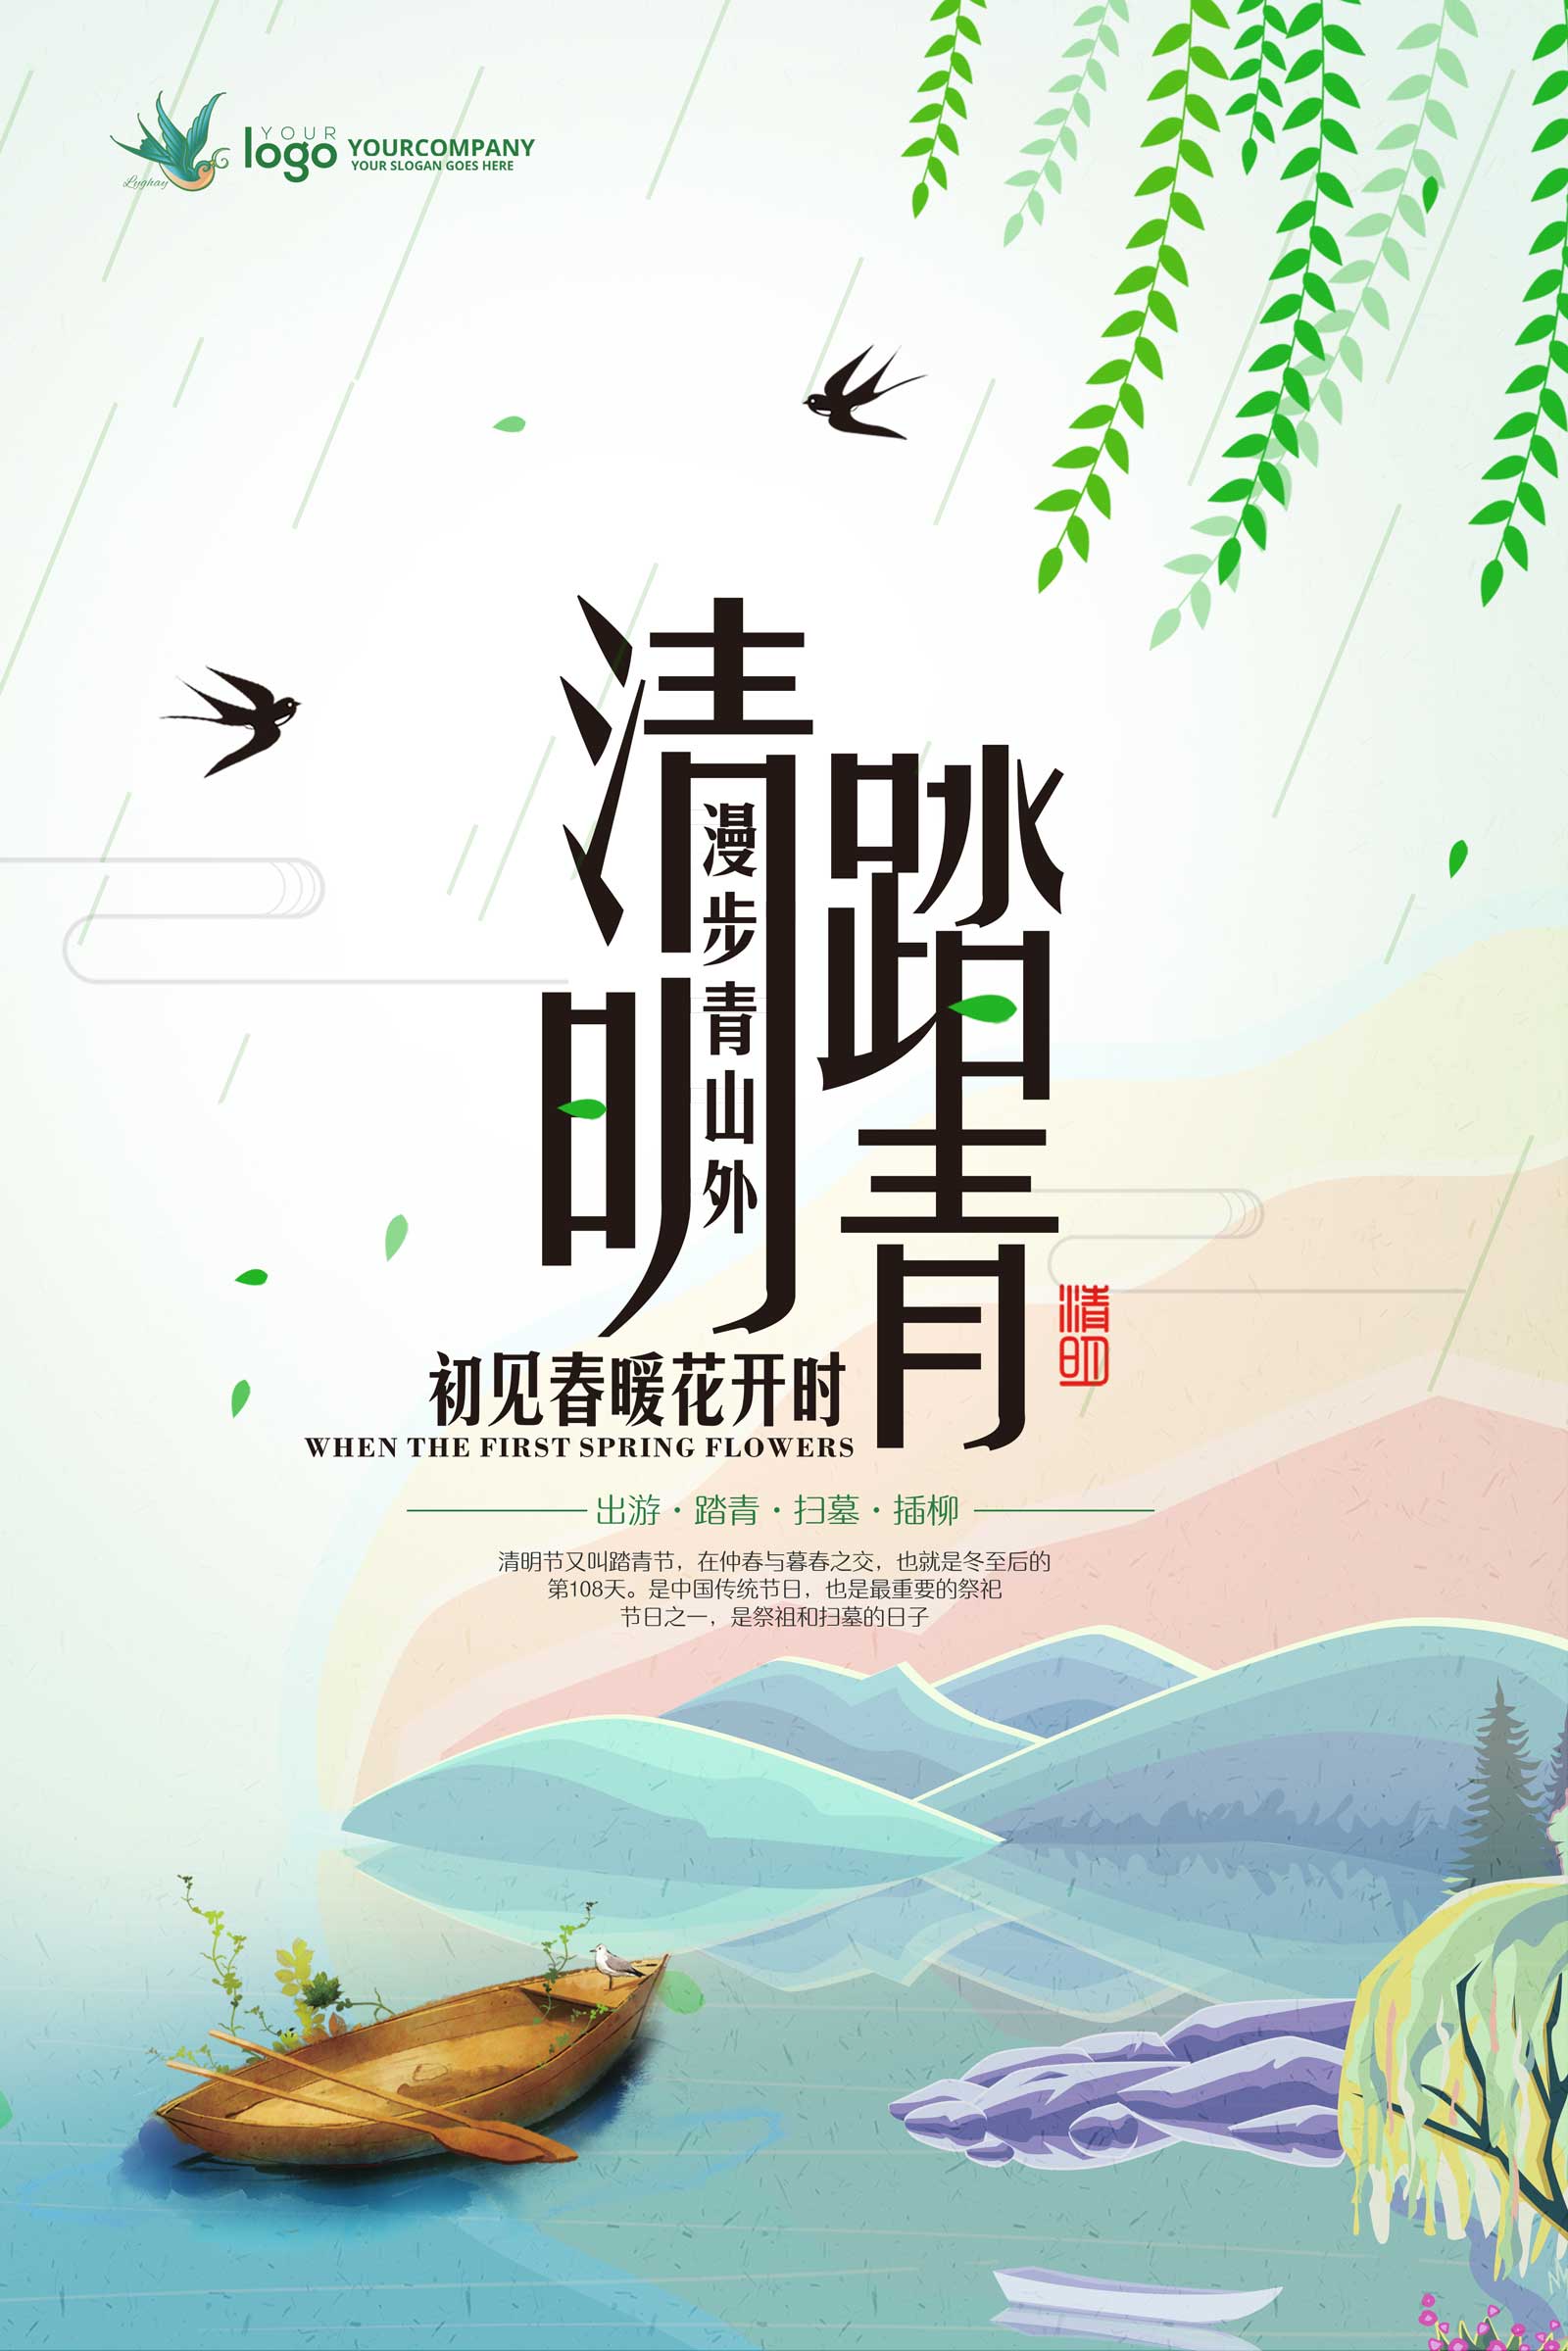 China Tomb-sweeping Day Ching Ming Festival celebrates poster design - China PSD File Free Download